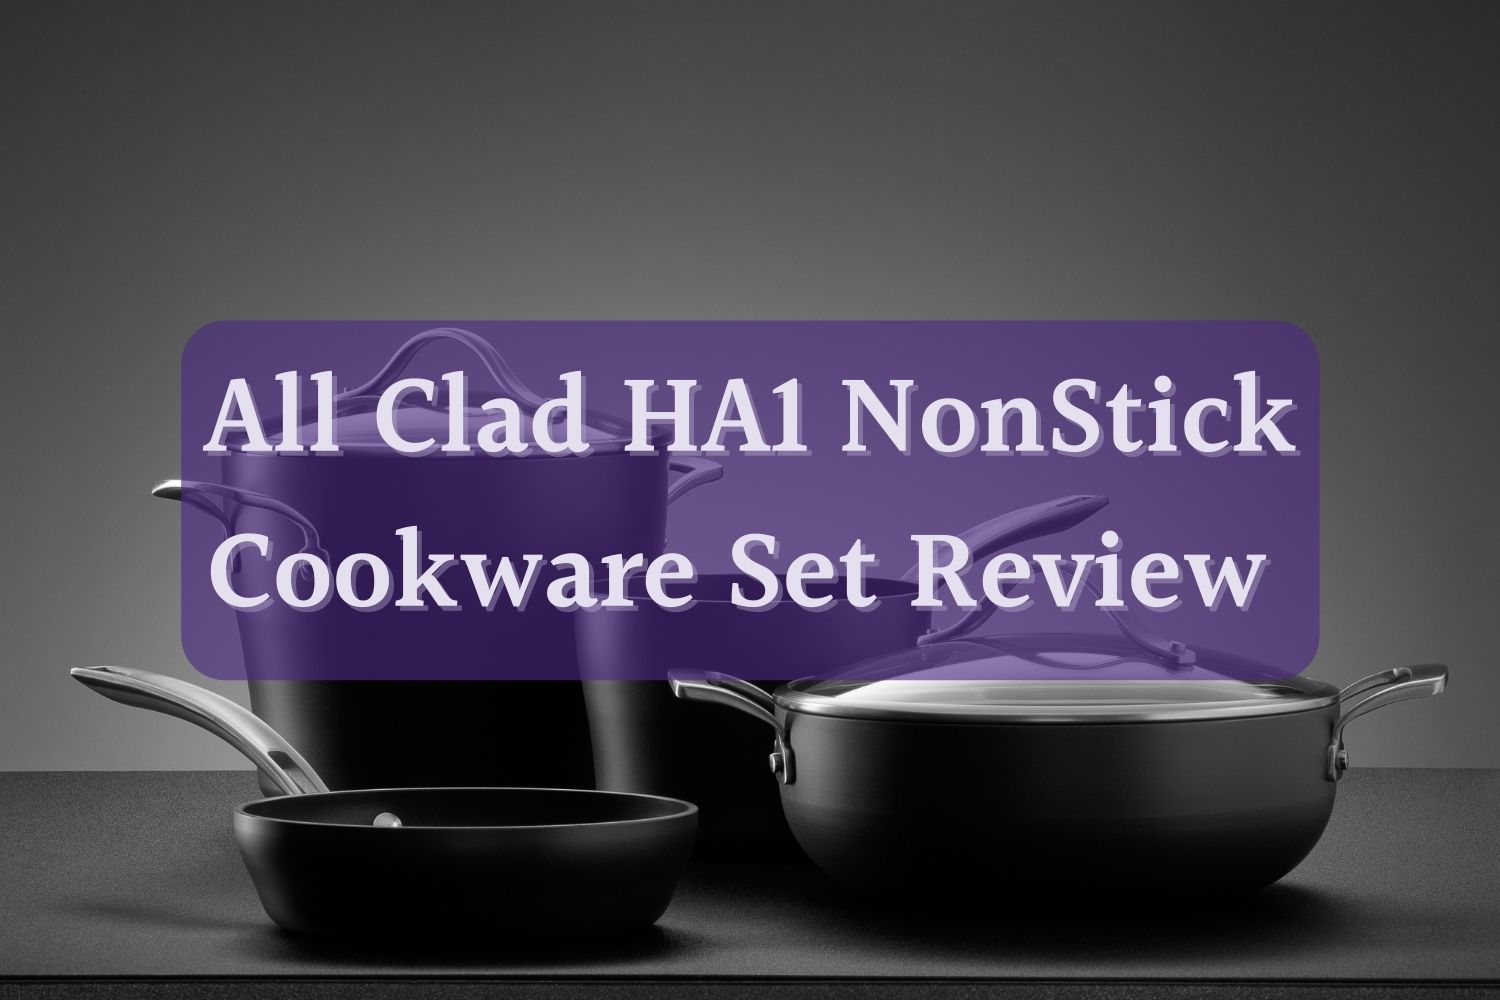 All-Clad HA1 vs. B1: Differences, Similarities, Pros, Cons - Prudent Reviews